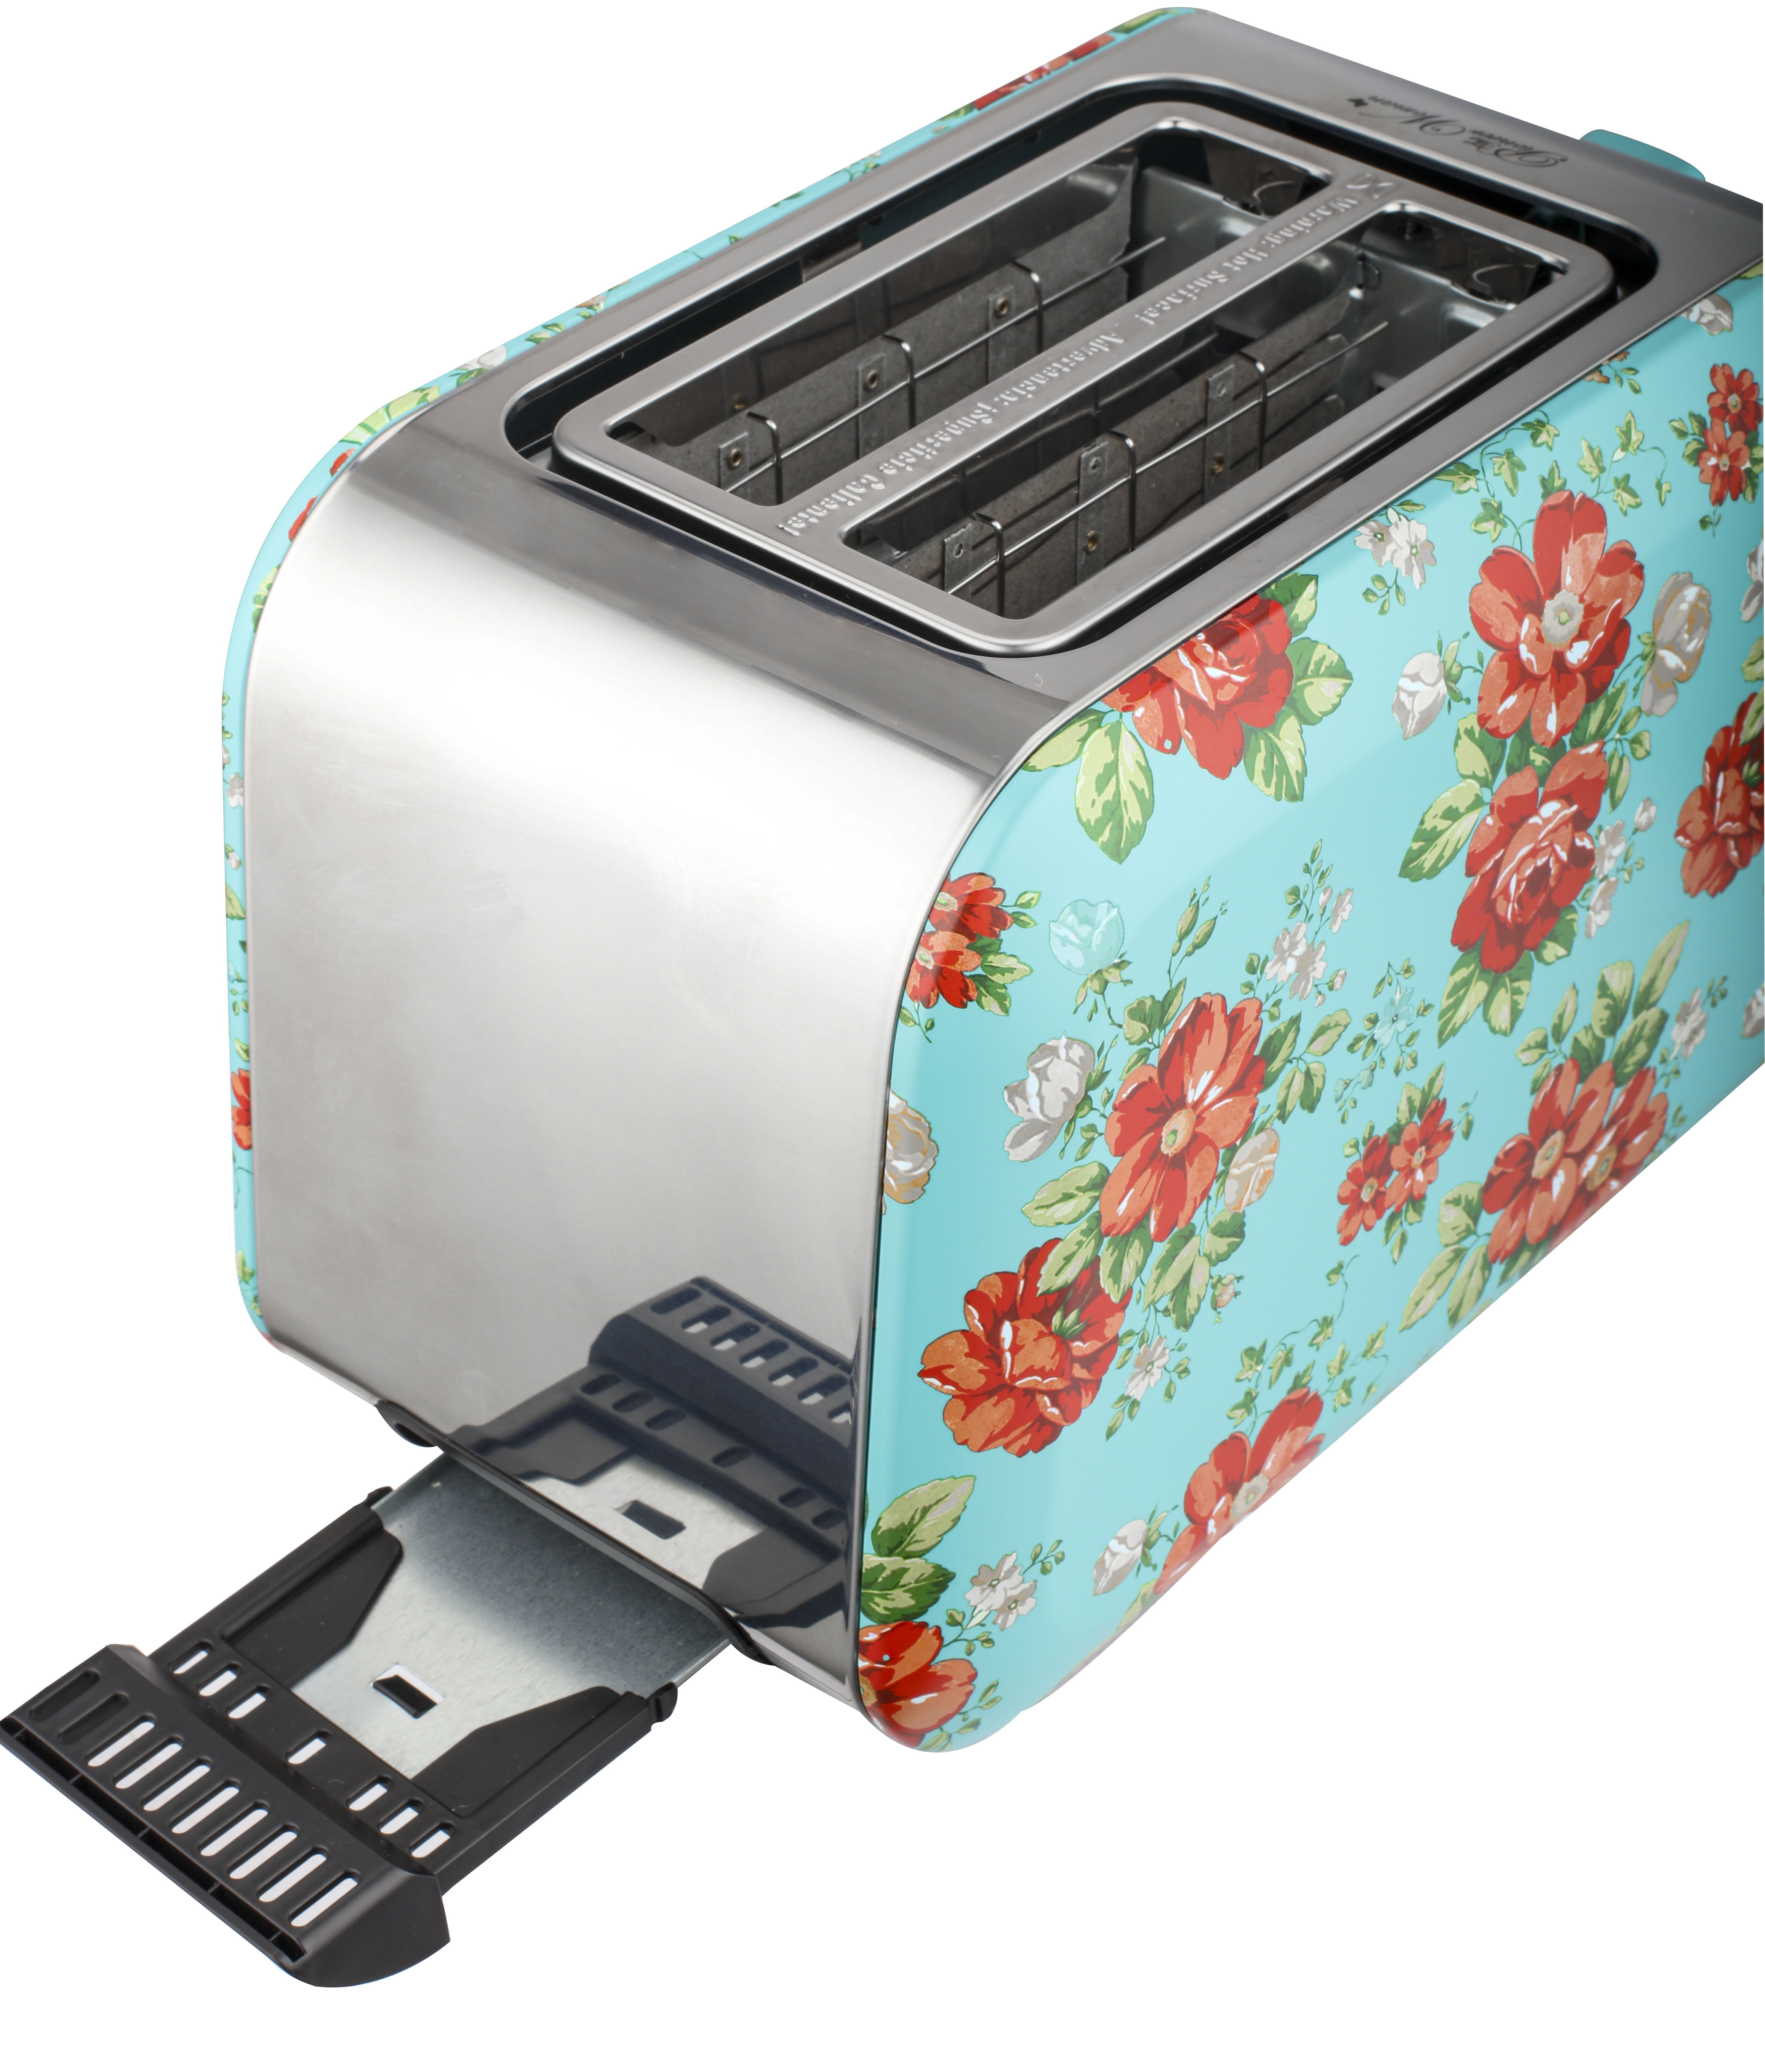 D. Two Slice Toaster Cover, Pioneer Woman, Vintage Floral, Retro